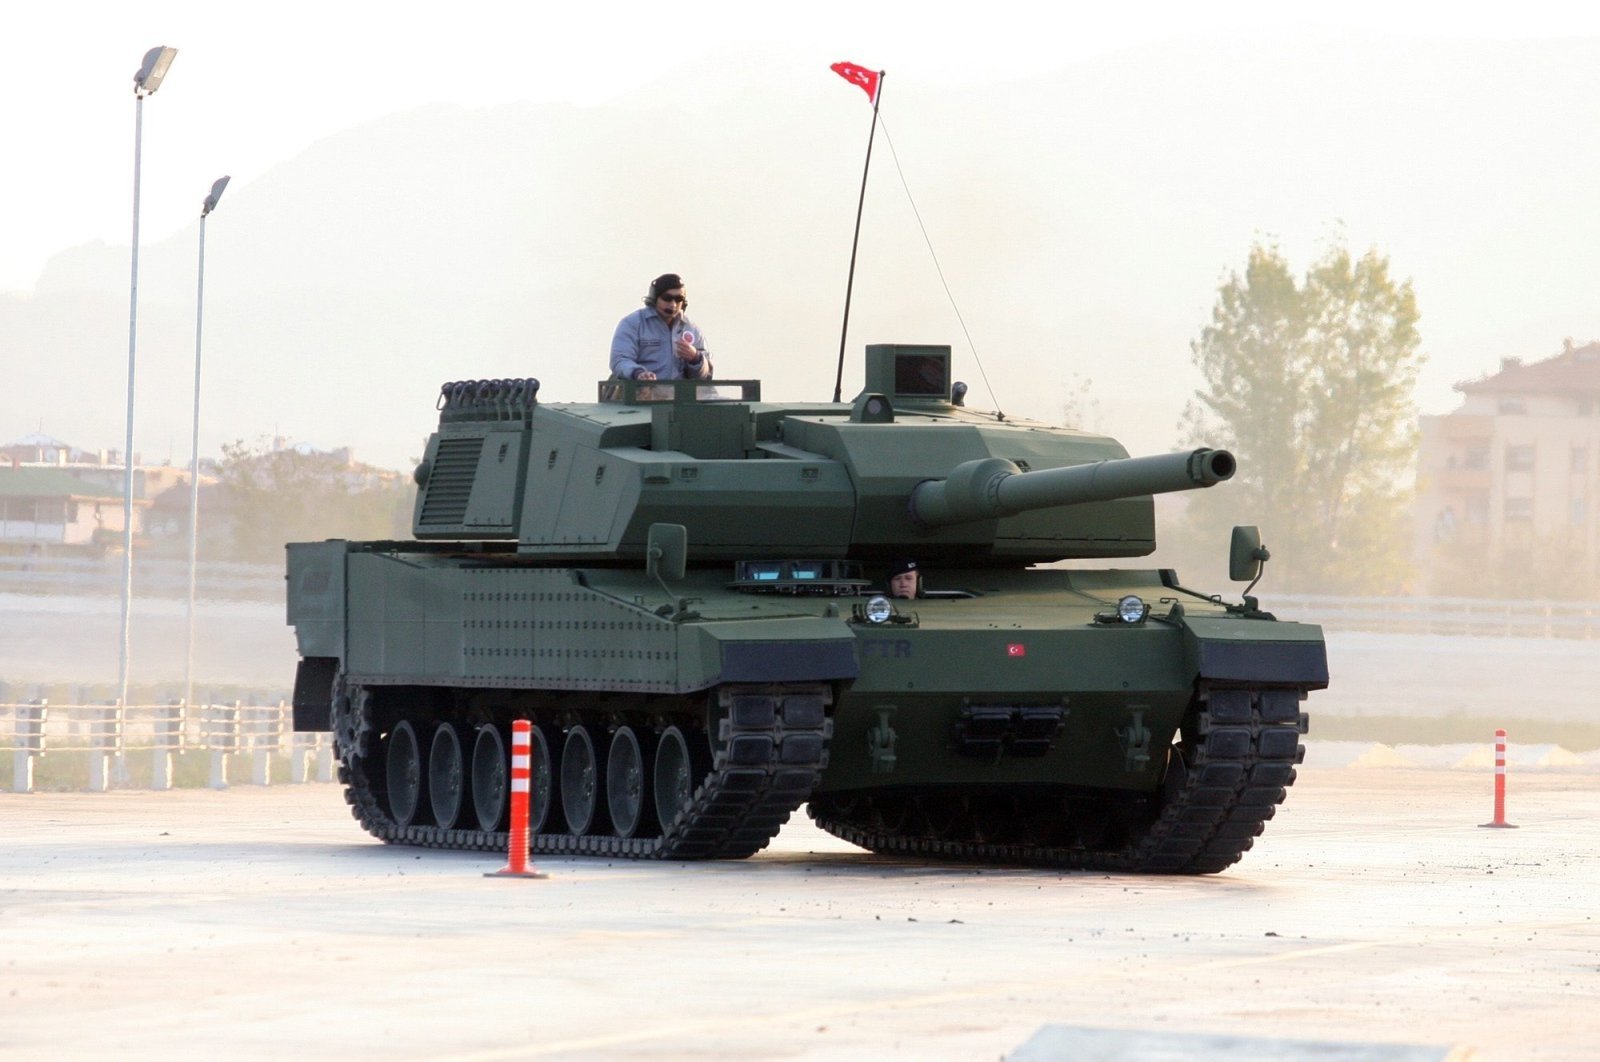 Turkey&#039;s main battle tank Altay is seen in this file photo, Nov. 15, 2012. (Photo by Mesut Er)